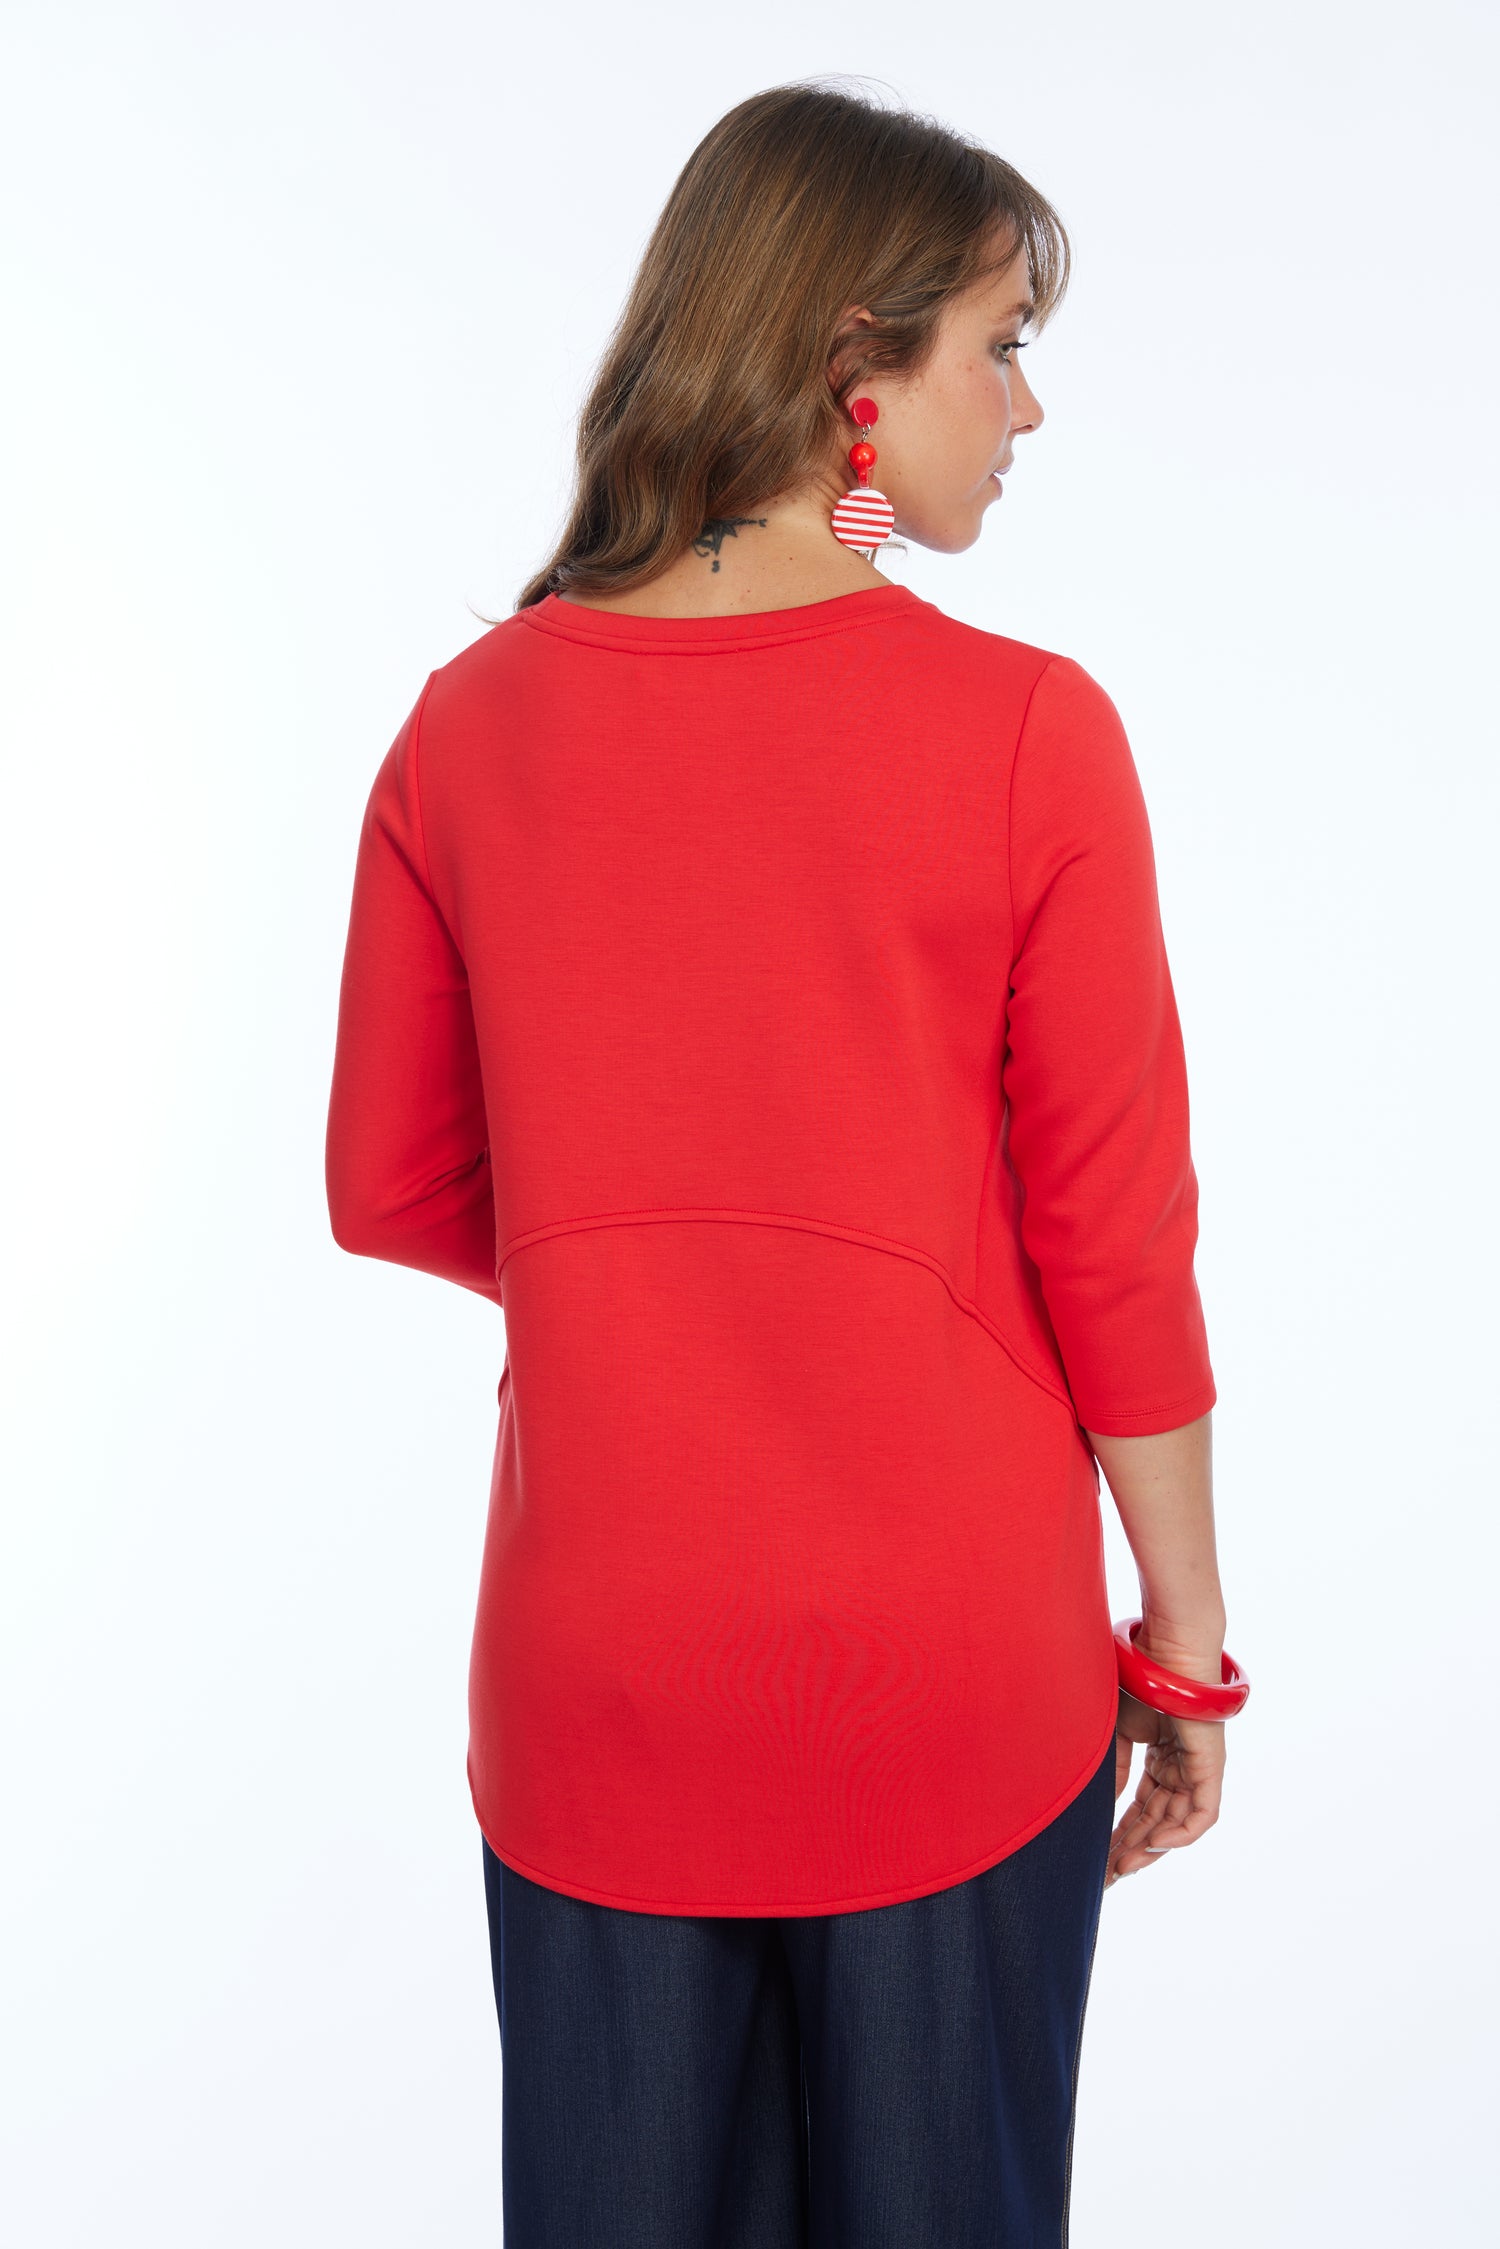 women's red ponte knit top